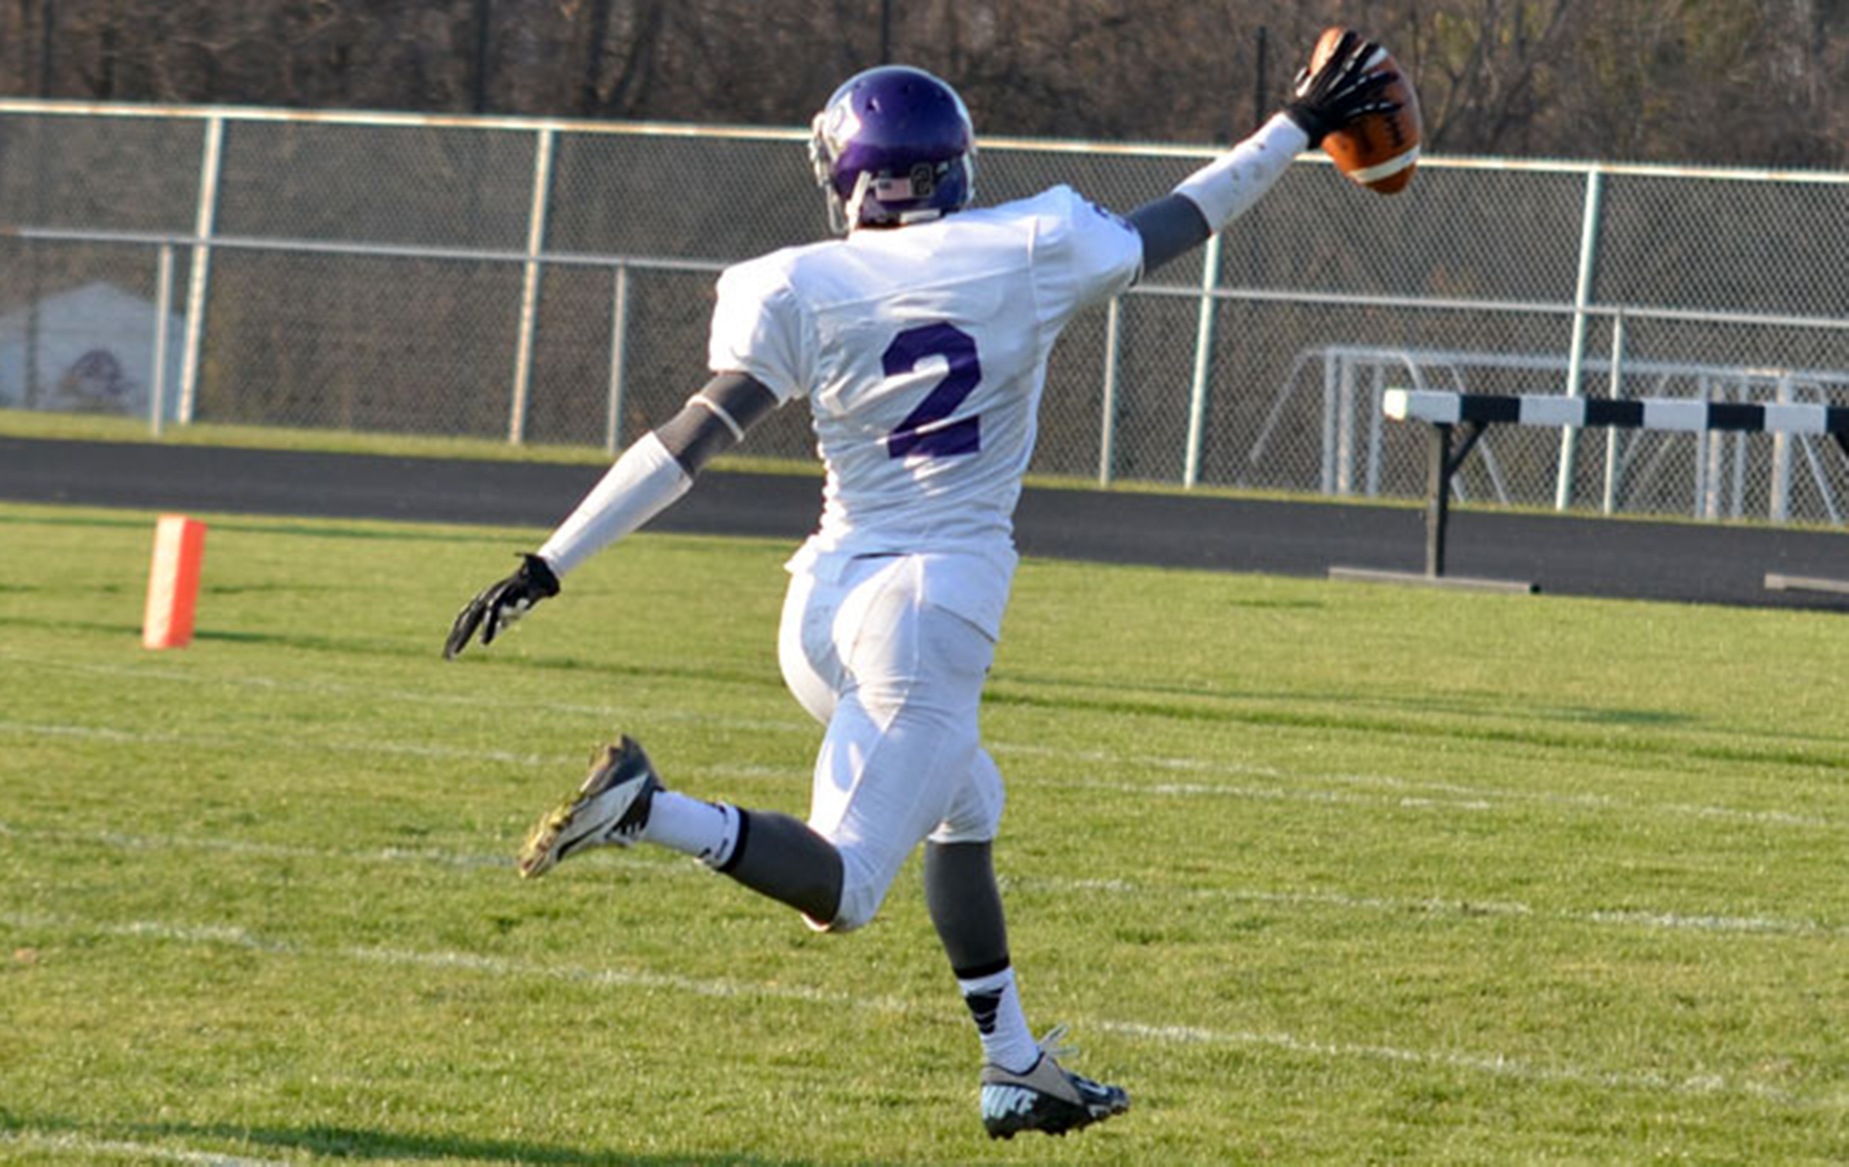 VOTE NOW! Leroy Cheatham for HCAC Highlight of the Week